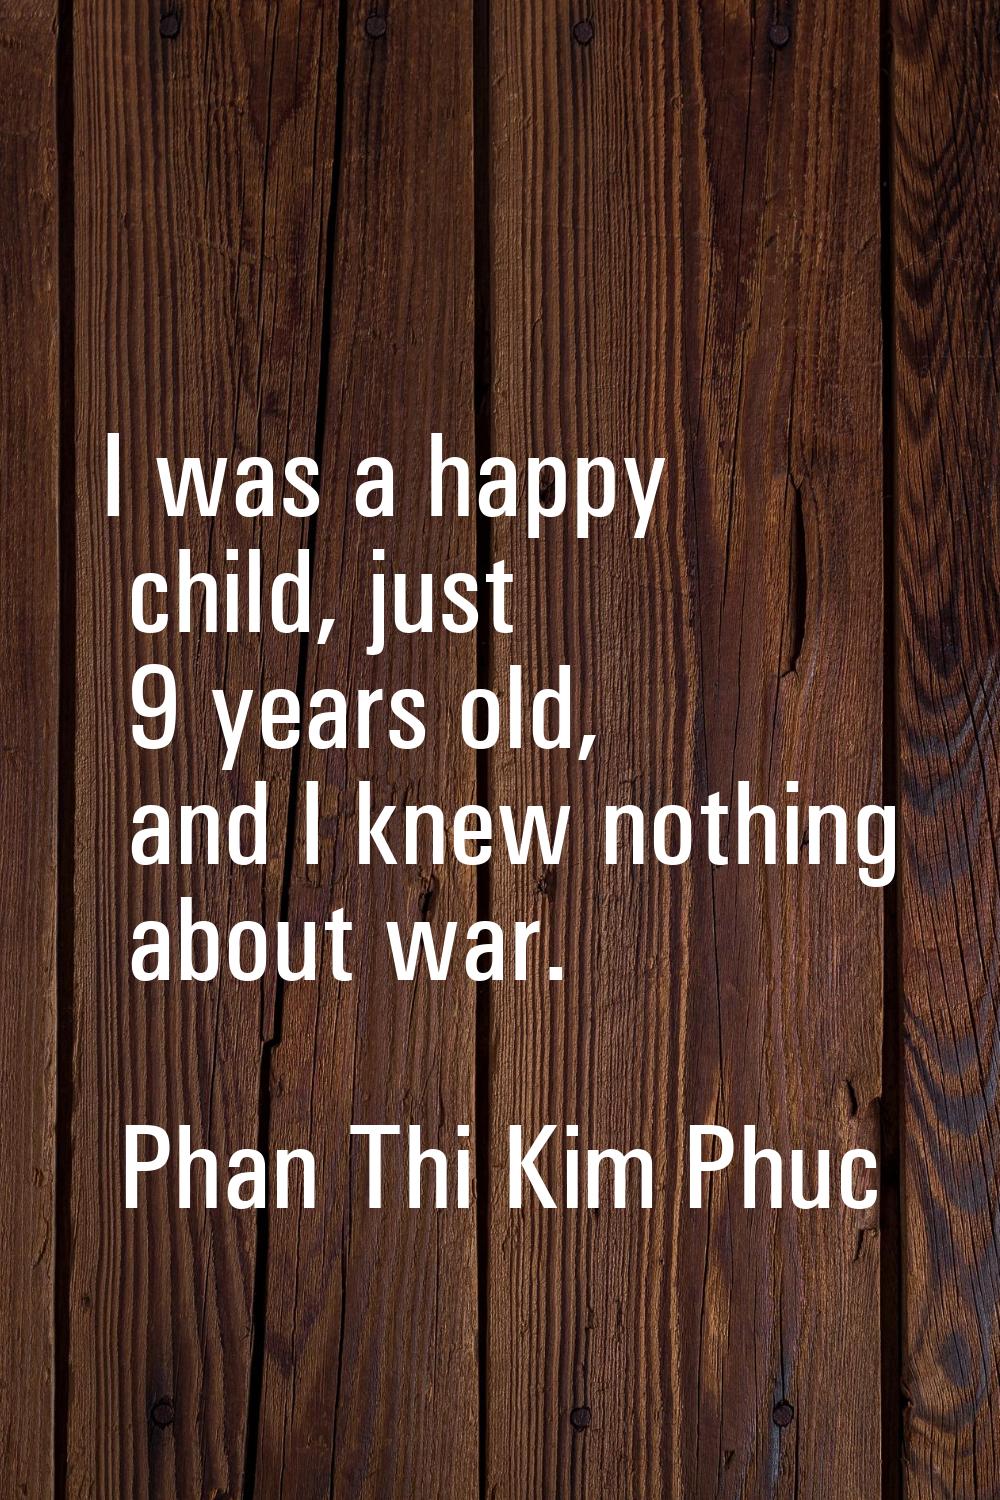 I was a happy child, just 9 years old, and I knew nothing about war.